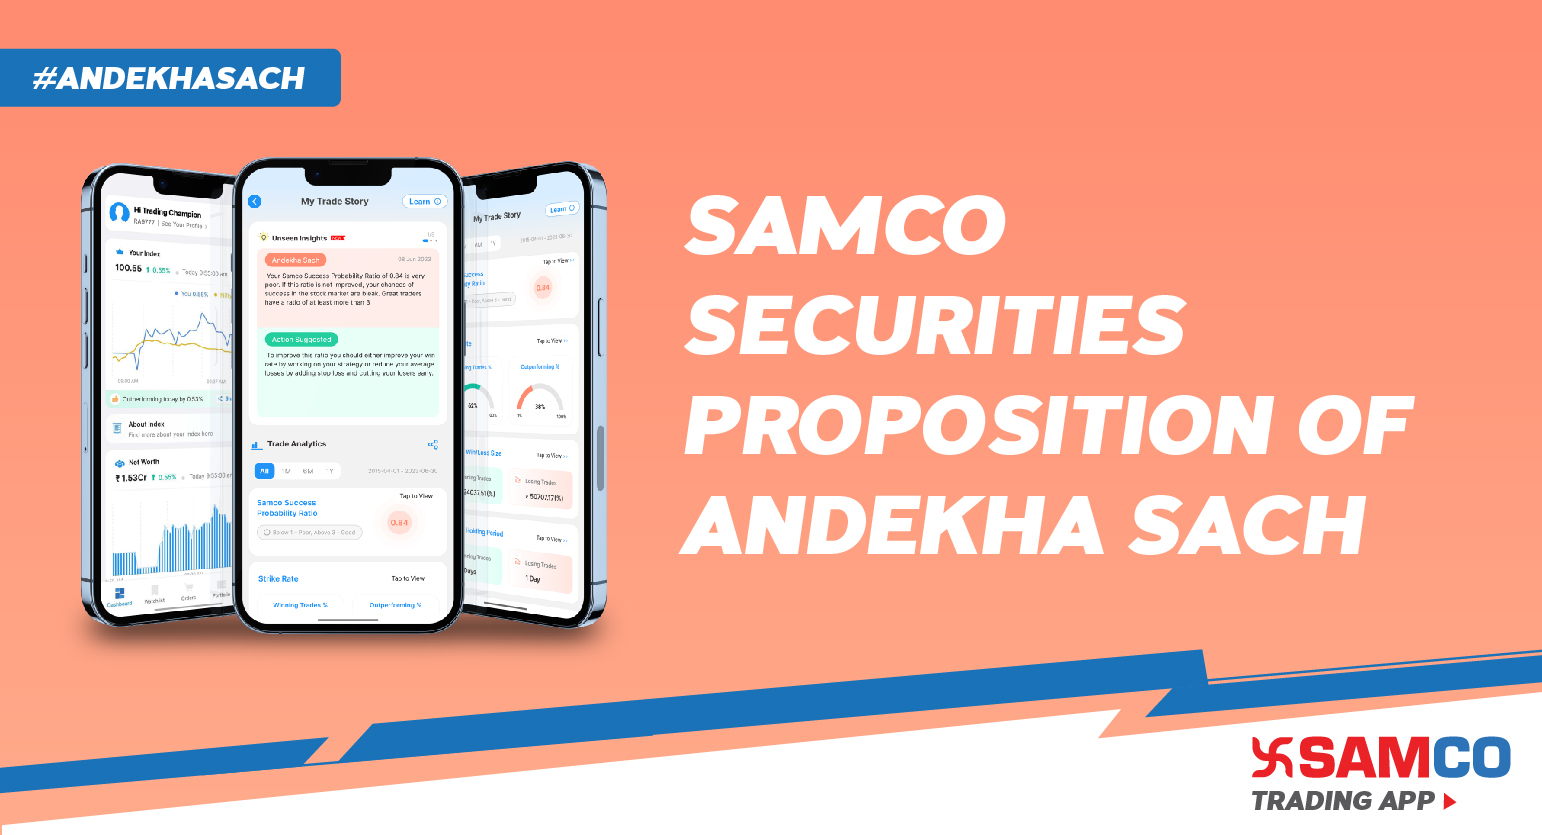 Samco Securities Propositionf of Andekha Sach